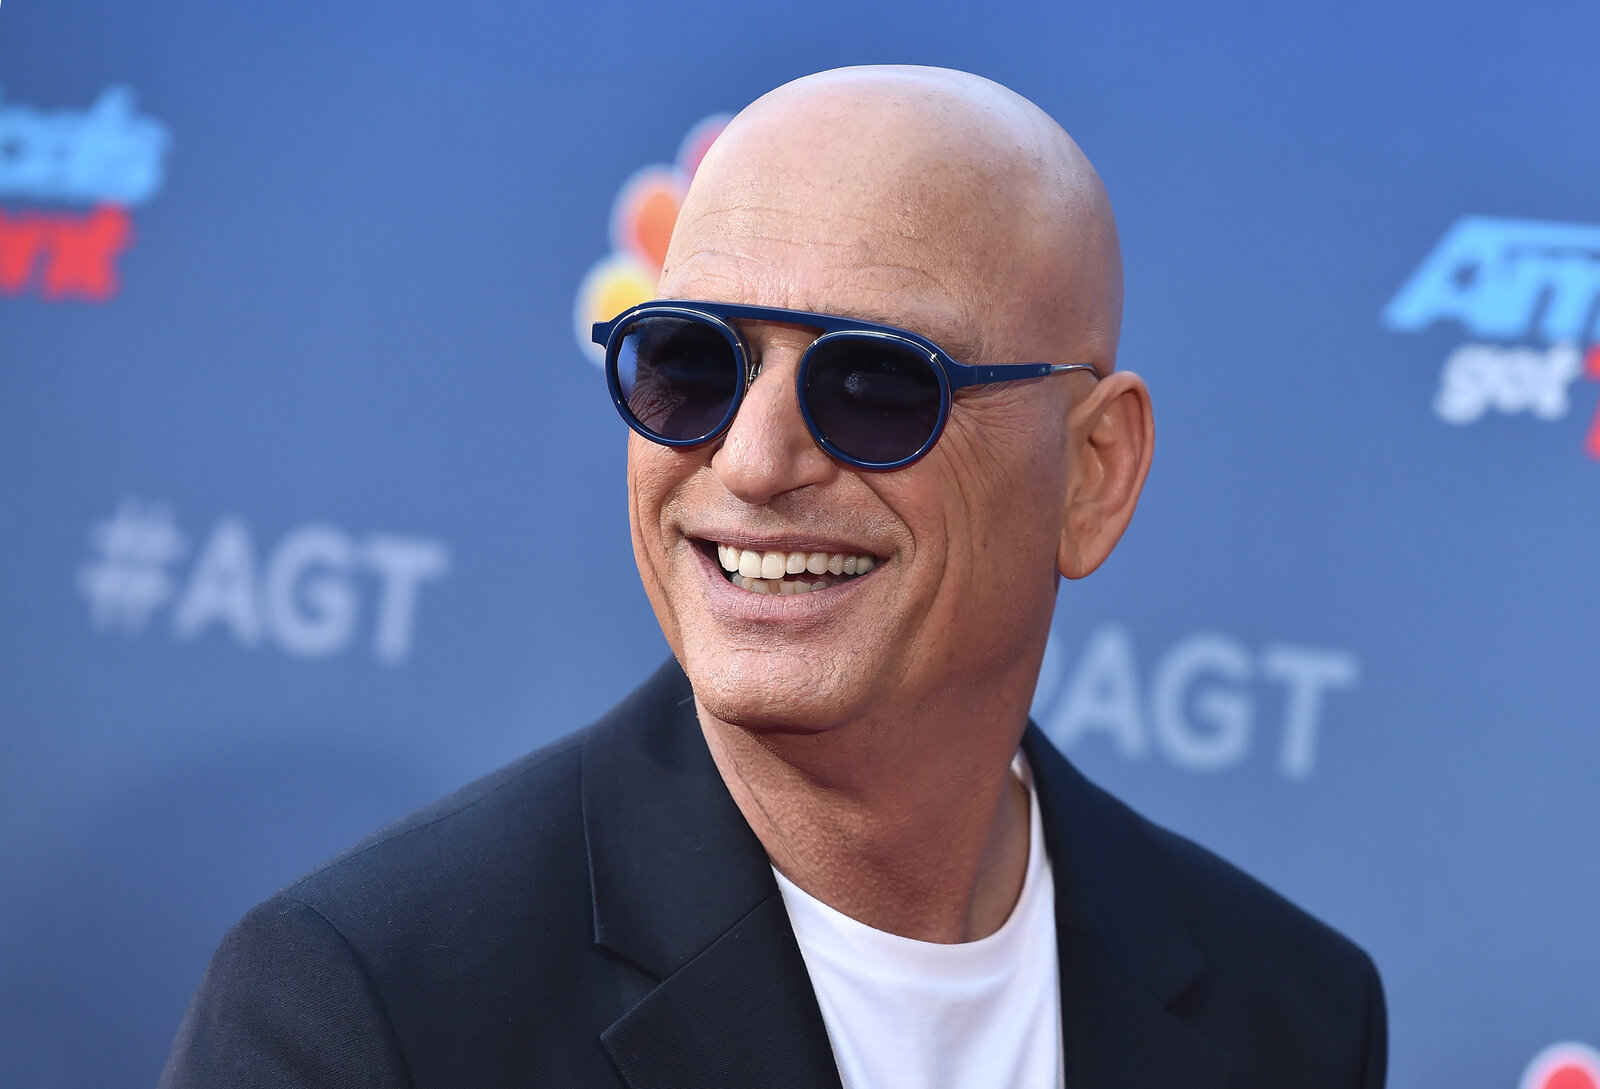 This new Netflix game show hosted by Howie Mandel is total bullsh*t